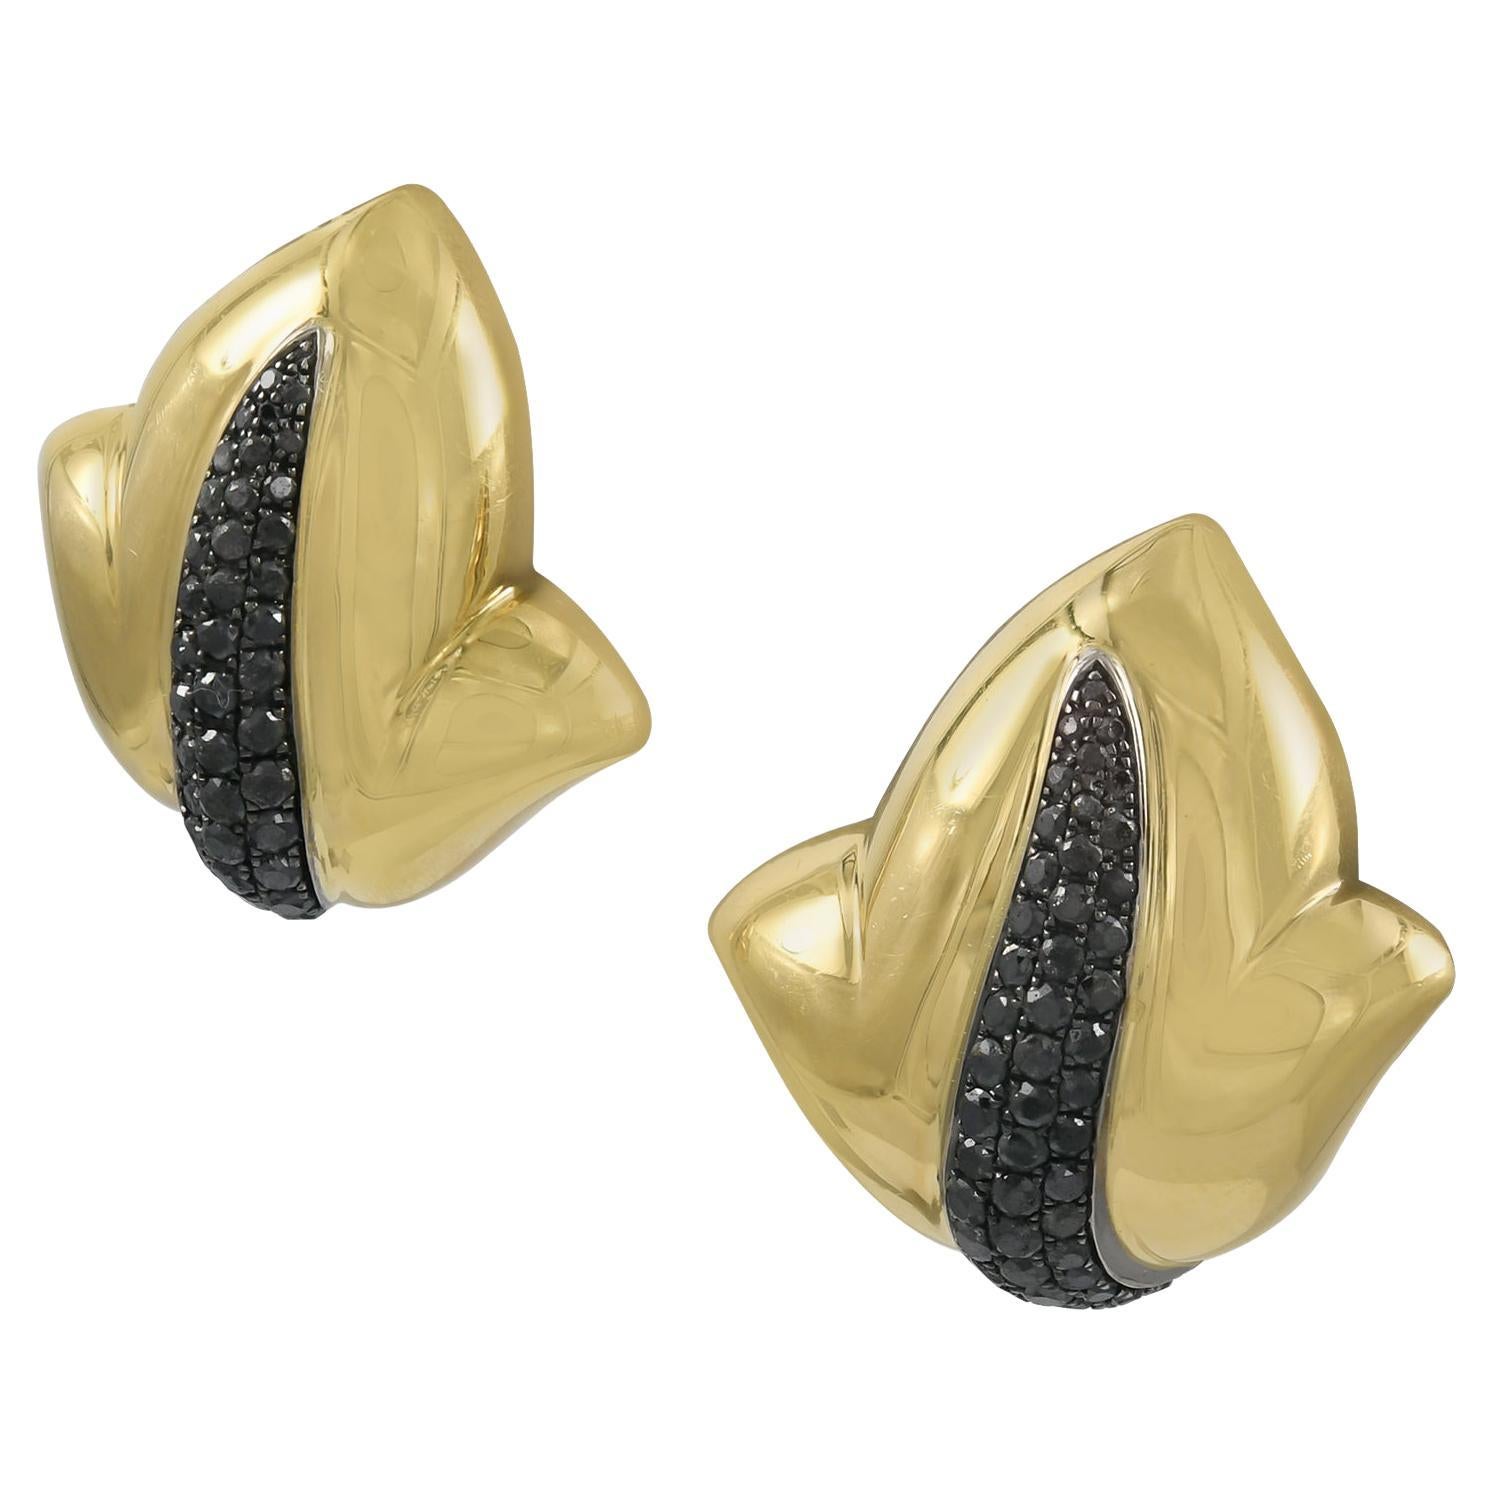 A pair of gold ear clips made in 18K yellow gold; set with 101 round brilliant-cut black diamonds, weighing a total of approximately 1.63 carats.
Measurements: 7/8 x 7/8 inch. 
Gross weight: 19.50 g.
Retail: $16,400
Signed: de GRISOGONO; numbered